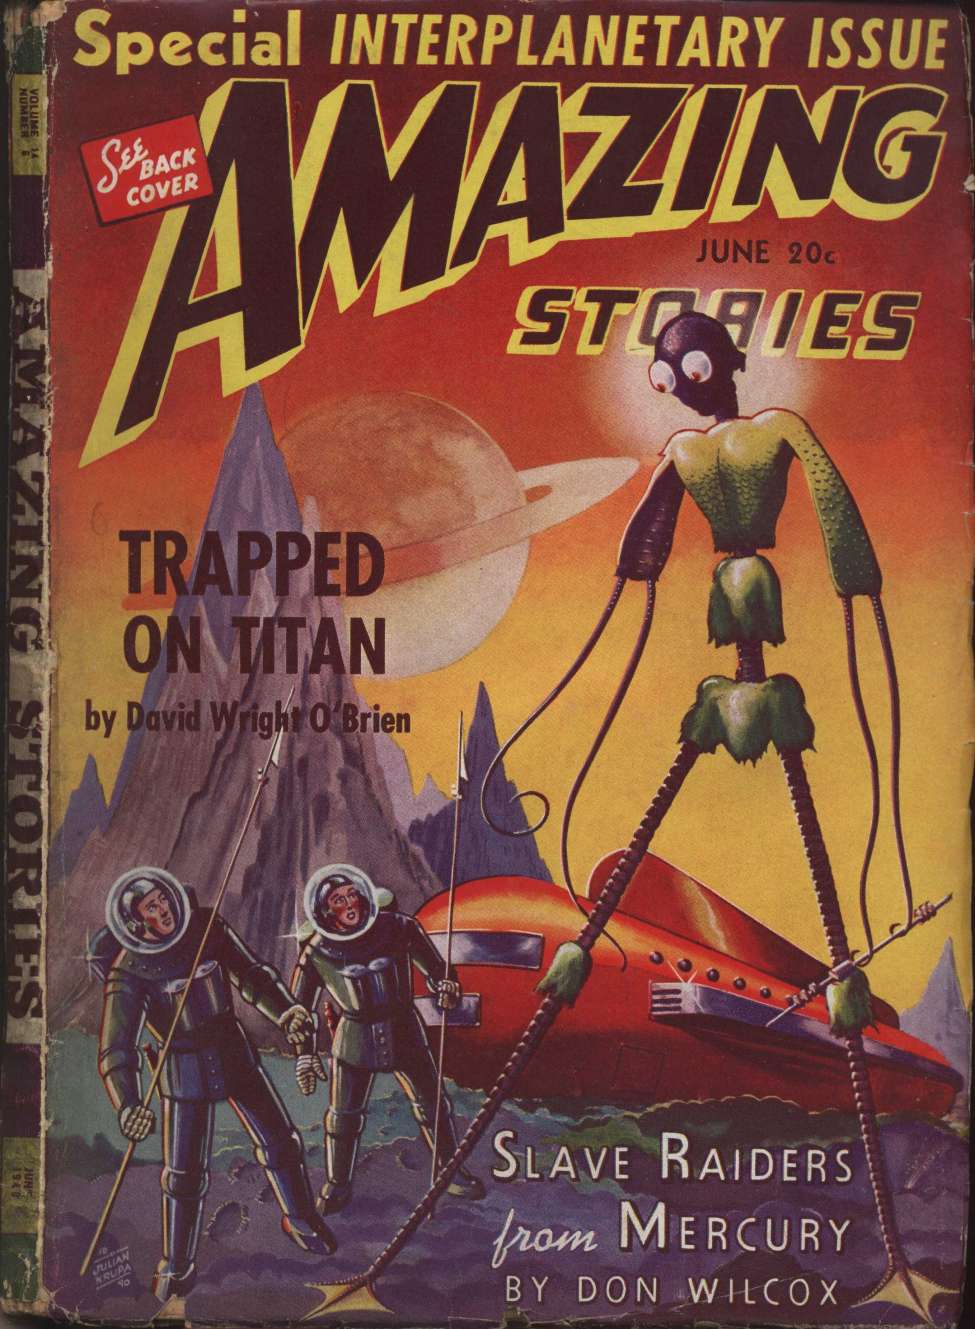 Comic Book Cover For Amazing Stories v14 6 - Slave Raiders from Mercury - Don Wilcox